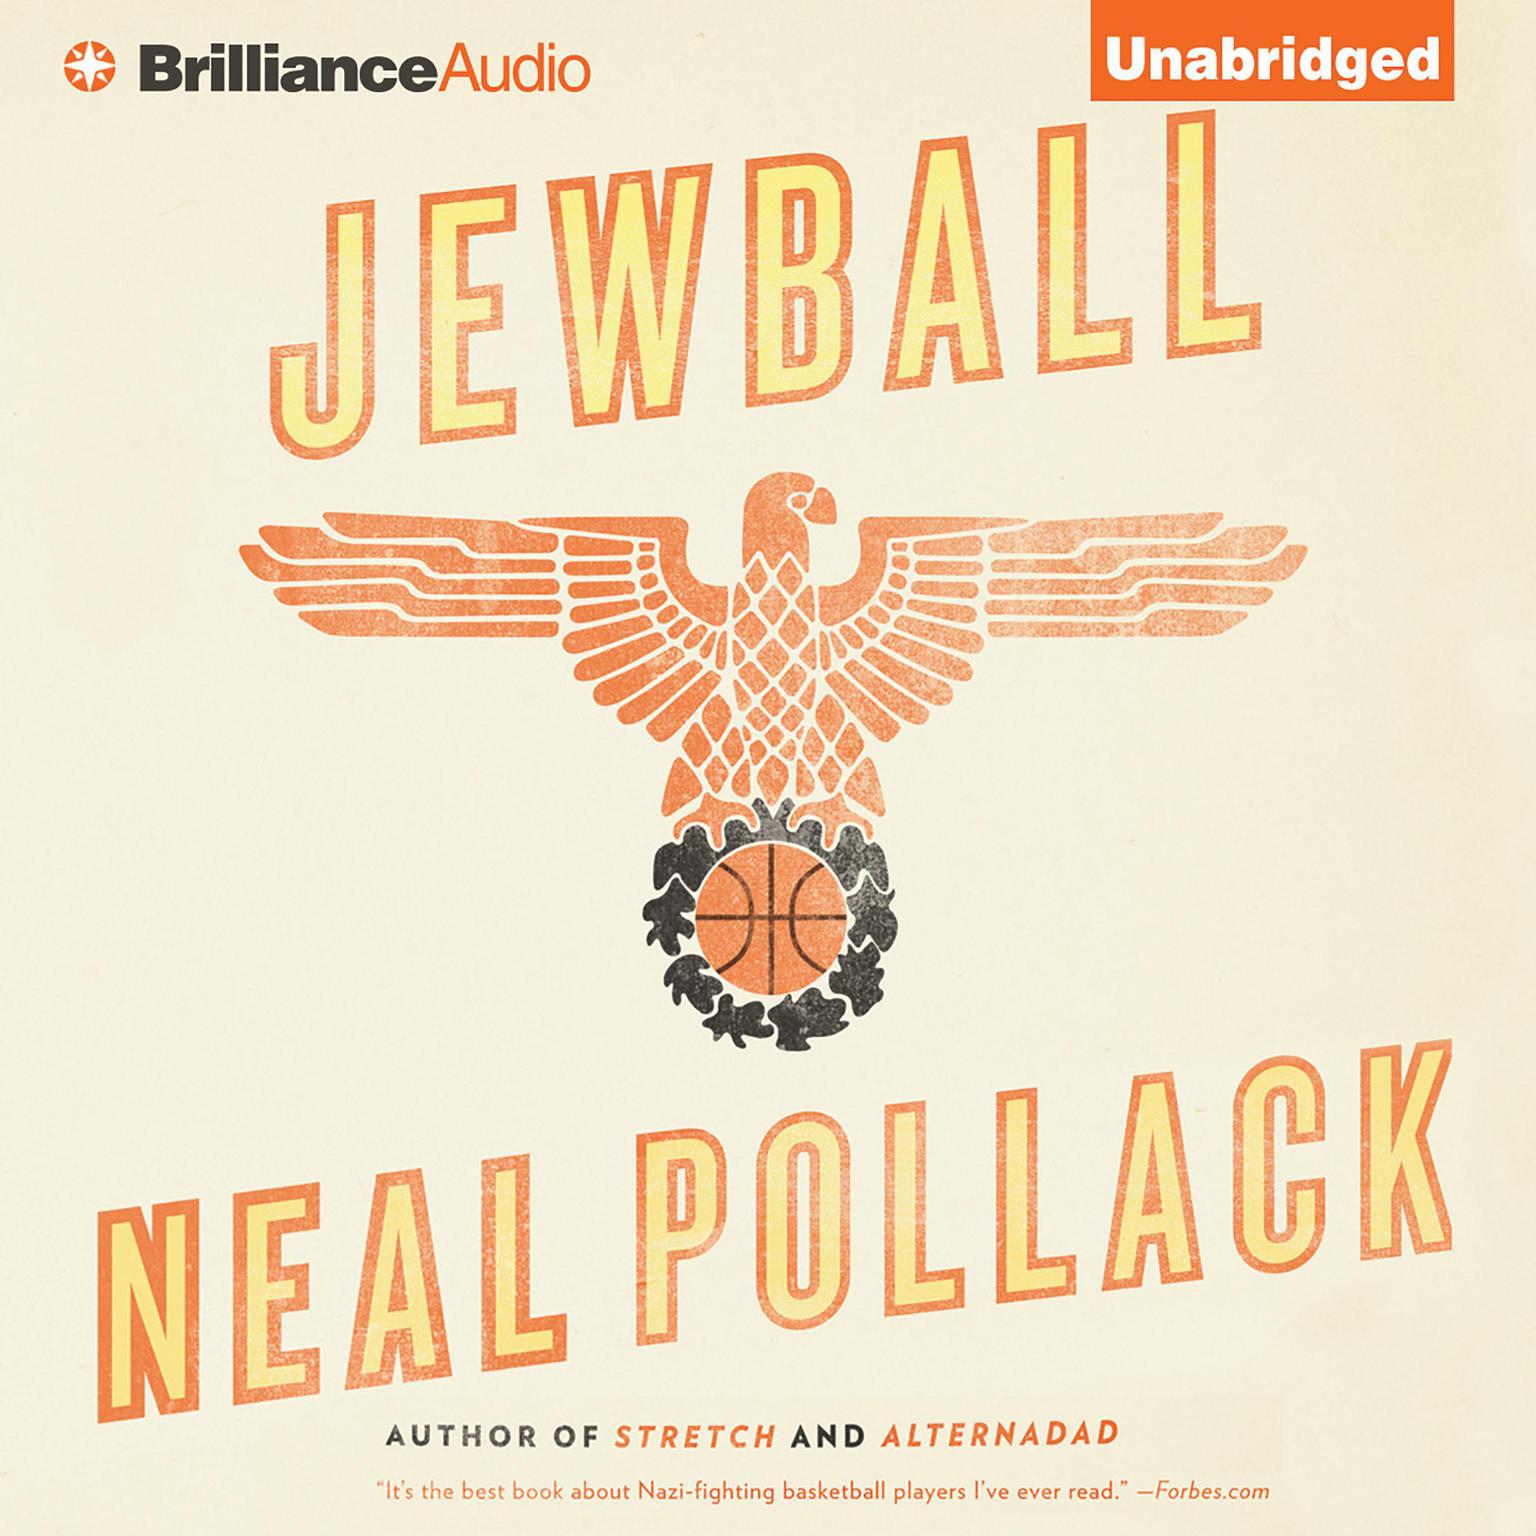 Jewball: A Novel Audiobook, by Neal Pollack